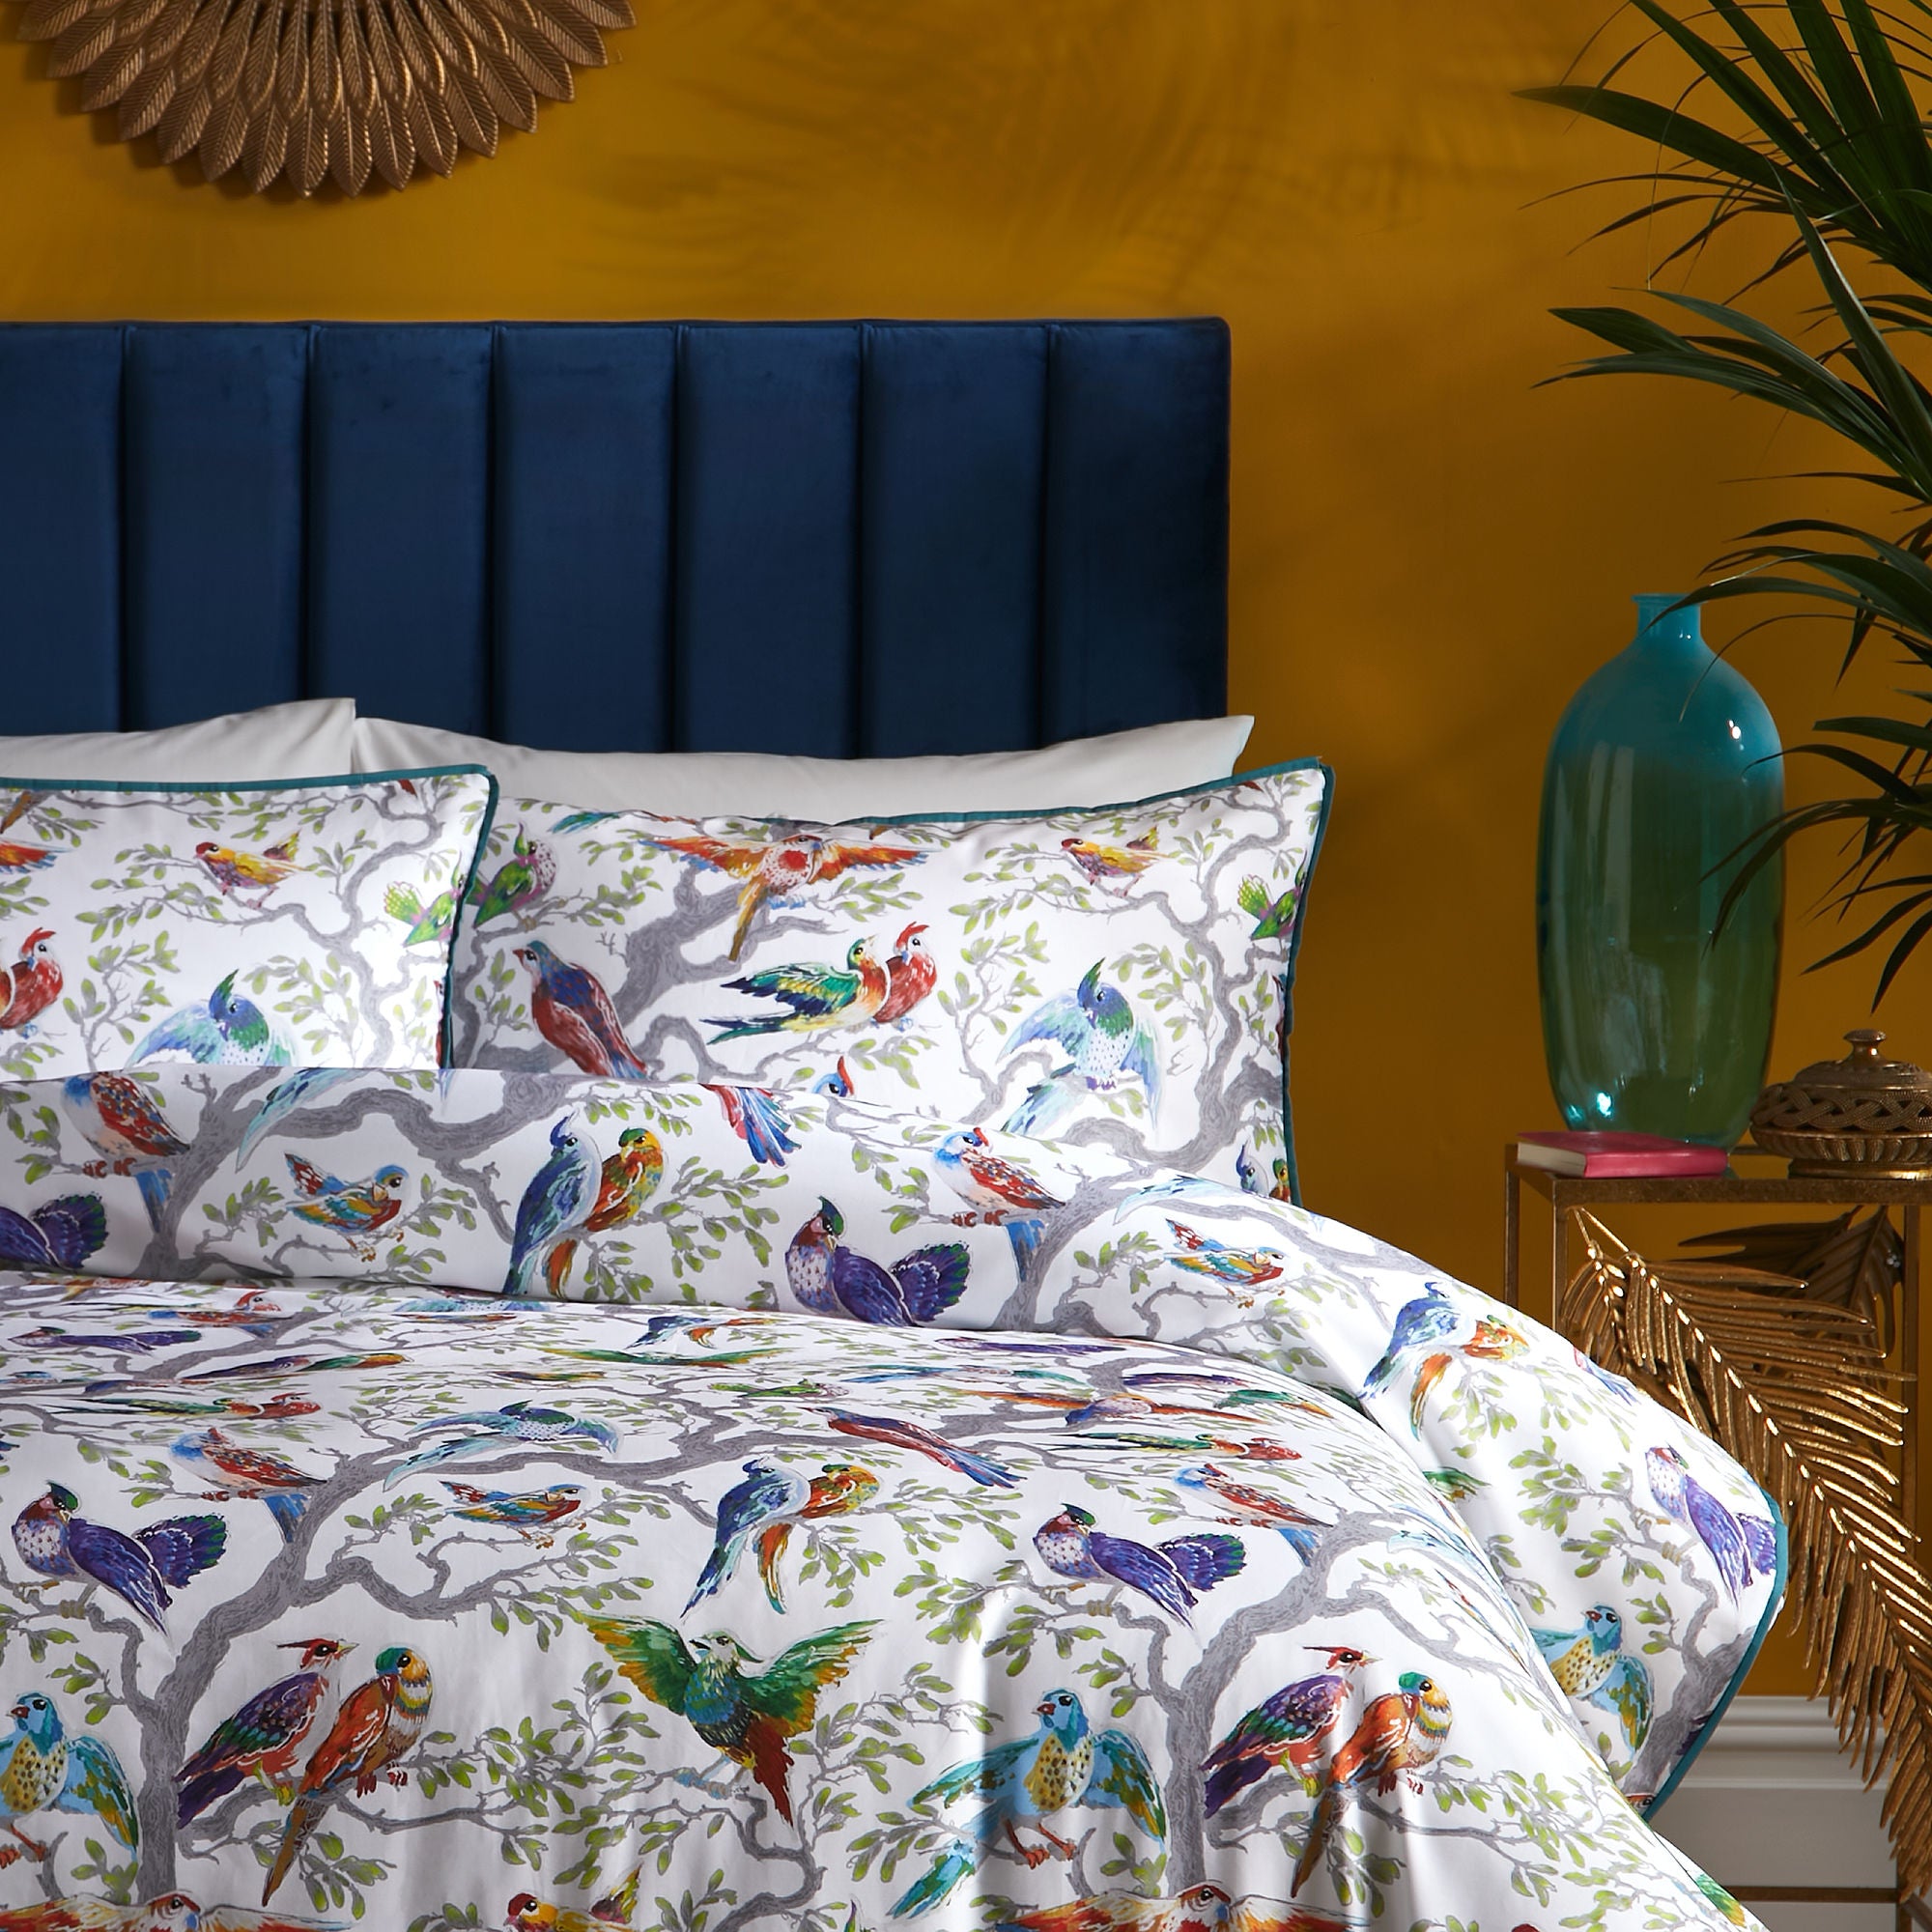 Birdity Absurdity Duvet Cover Set by Laurence Llewelyn-Bowen in Multi - Duvet Cover Set - Laurence Llewelyn-Bowen